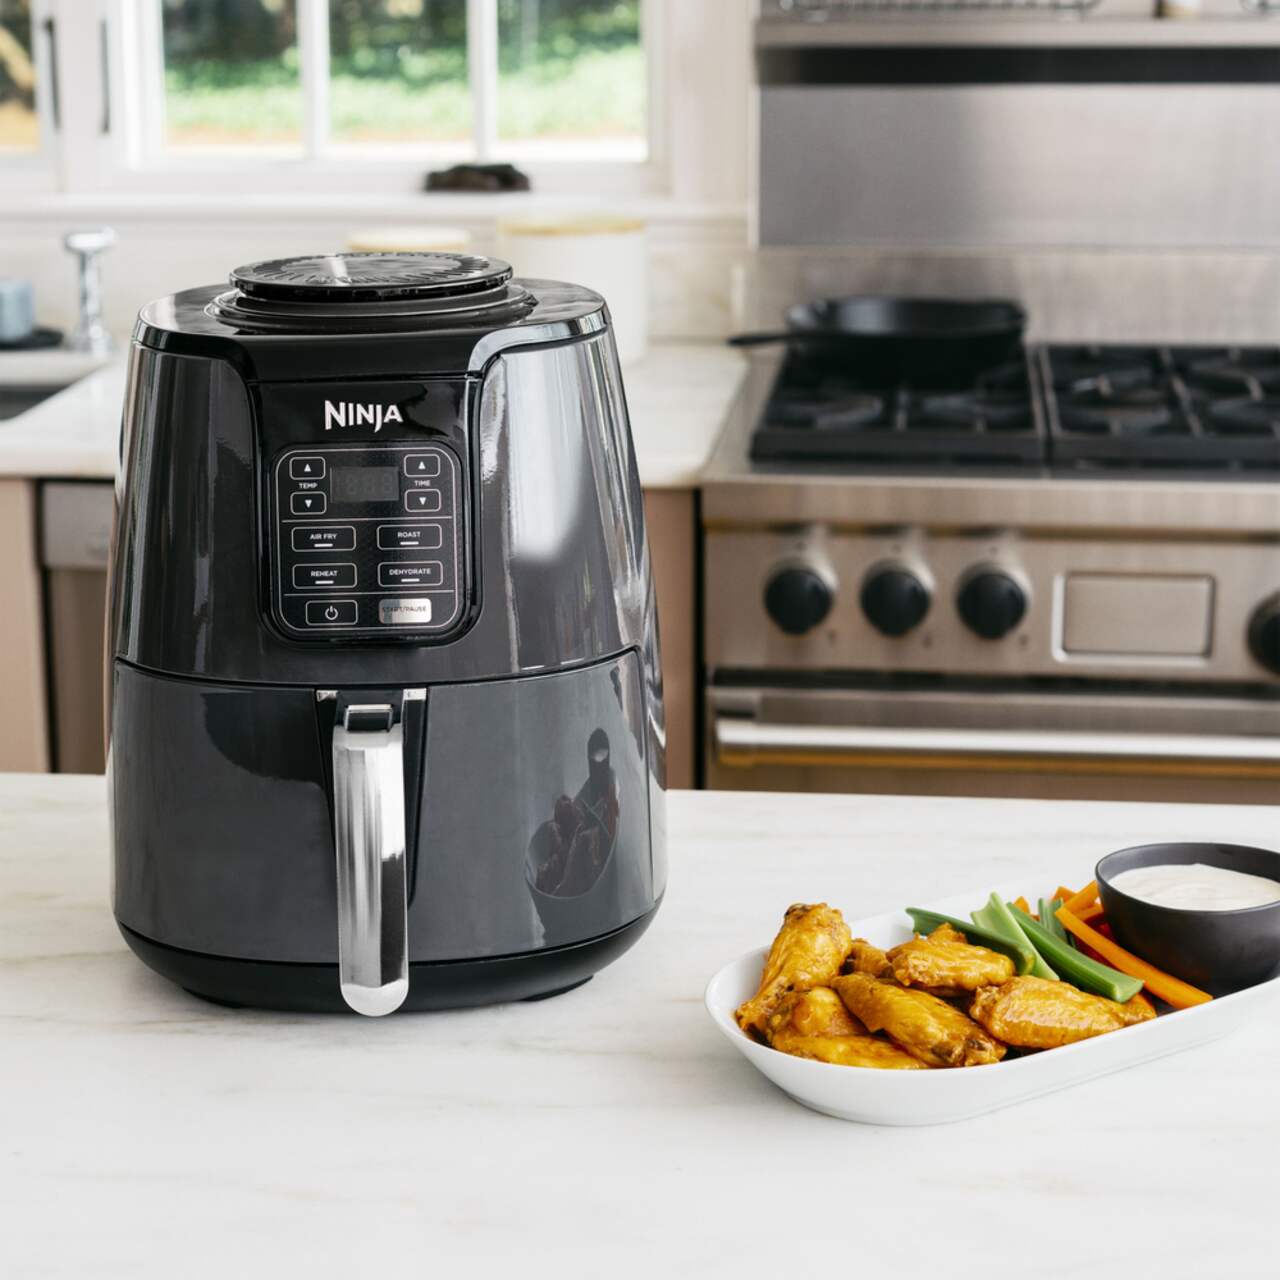 https://media-www.canadiantire.ca/product/living/kitchen/kitchen-appliances/0439582/ninja-cyclonic-air-fryer-b775ea77-ea37-48ae-80bb-f01f62647523.png?imdensity=1&imwidth=1244&impolicy=mZoom